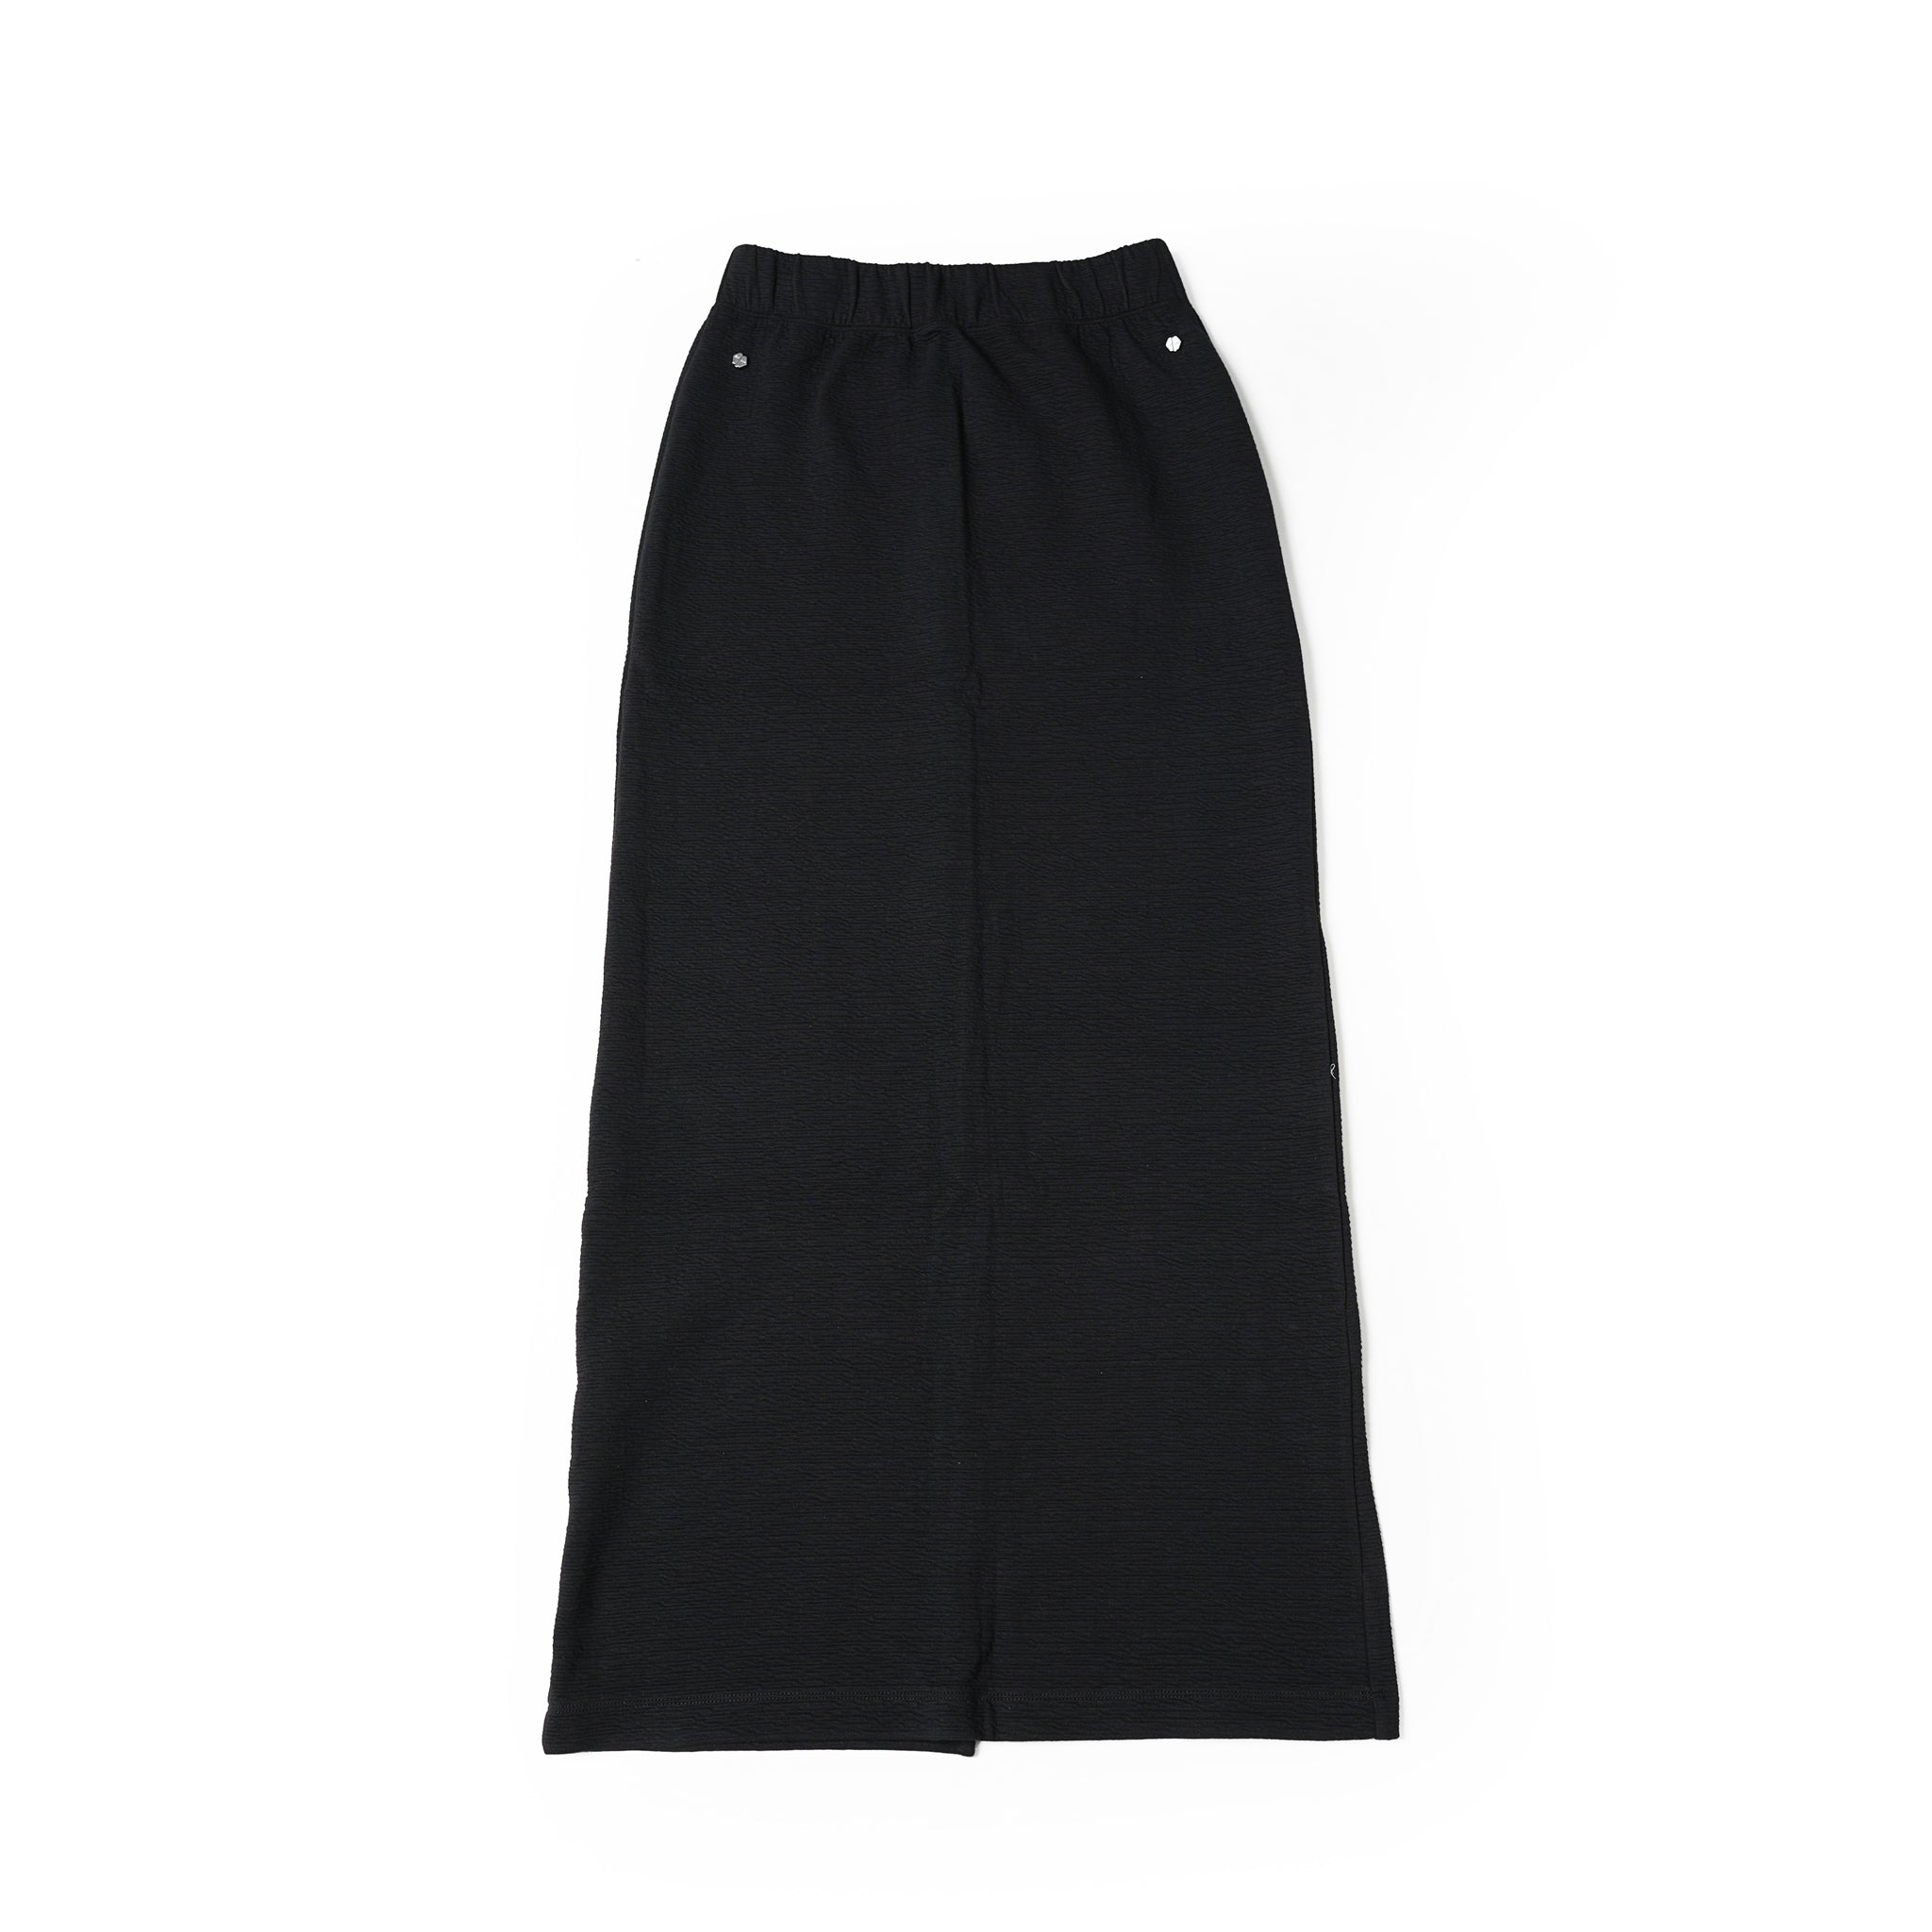 No:Seivson Skirt | Name:Seivson x FRUITION "Fruit Leather Textured Wrinkle-Free Fabric Screw Slit Long Dress" Black【SEIVSON_セイブソン】